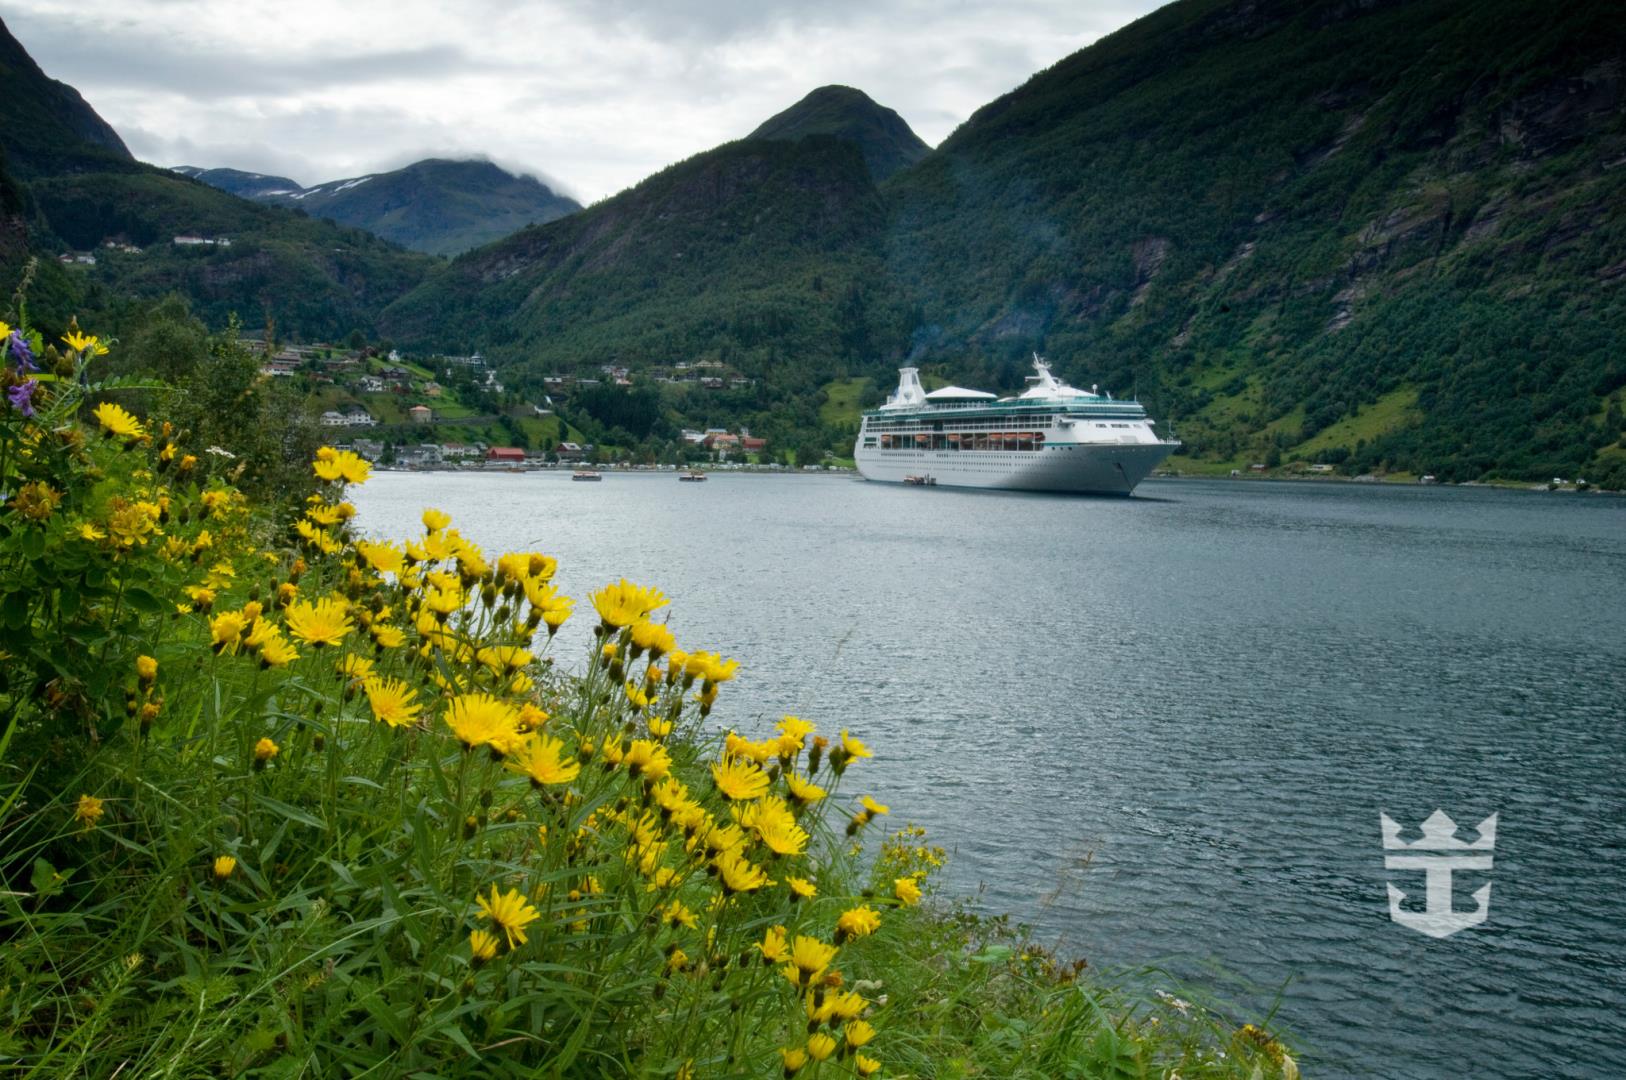 Exterior view of Vision of the Seas in Norway and yellow daisies